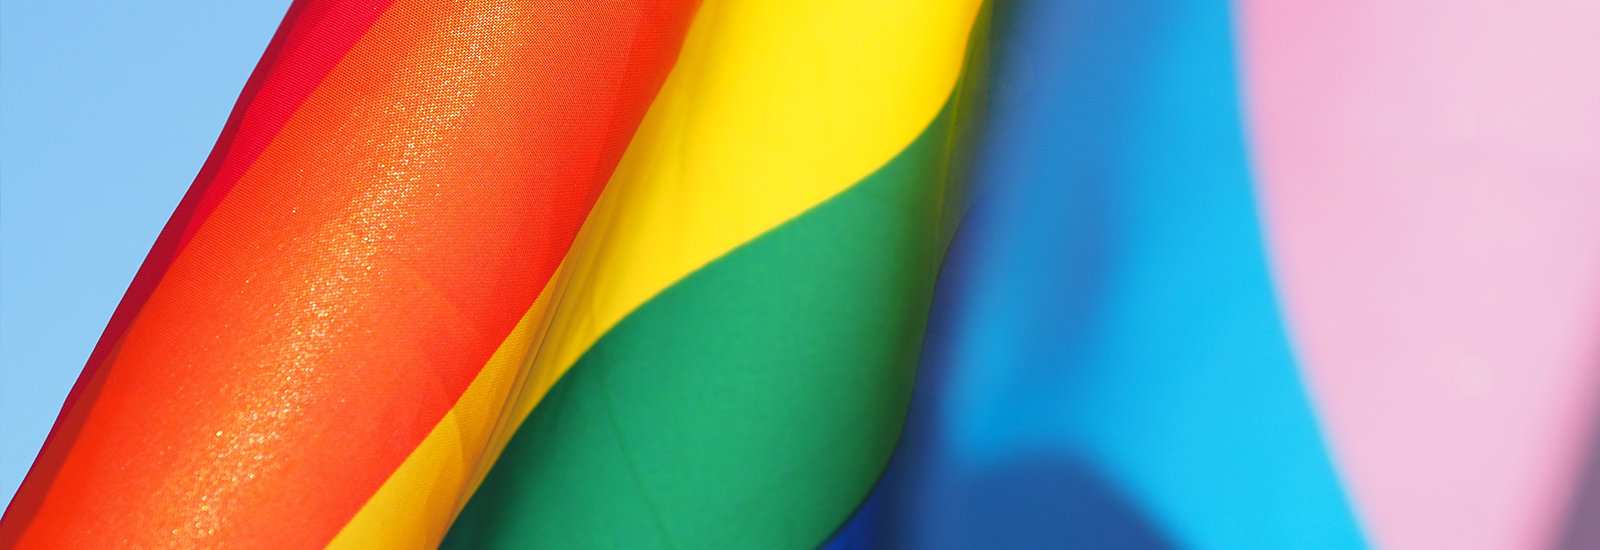 Photograph of pride flag